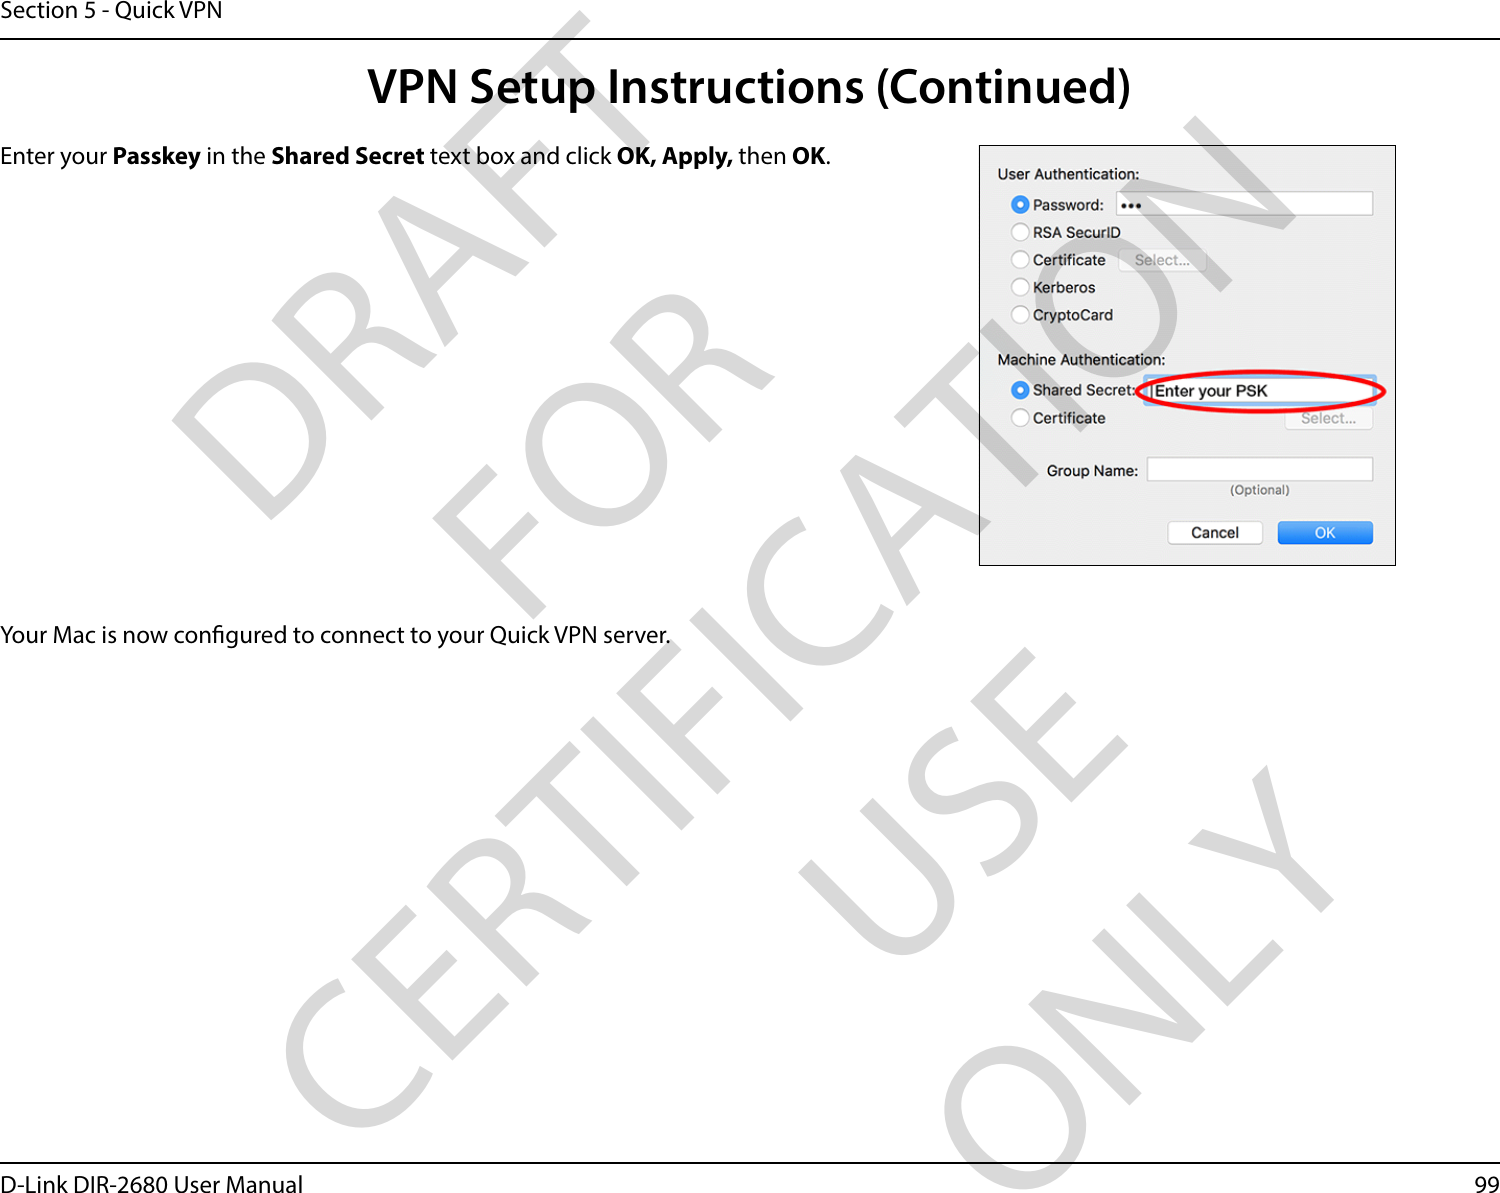 99D-Link DIR-2680 User ManualSection 5 - Quick VPNEnter your Passkey in the Shared Secret text box and click OK, Apply, then OK.Your Mac is now congured to connect to your Quick VPN server.VPN Setup Instructions (Continued)DRAFT FOR CERTIFICATION USE ONLY